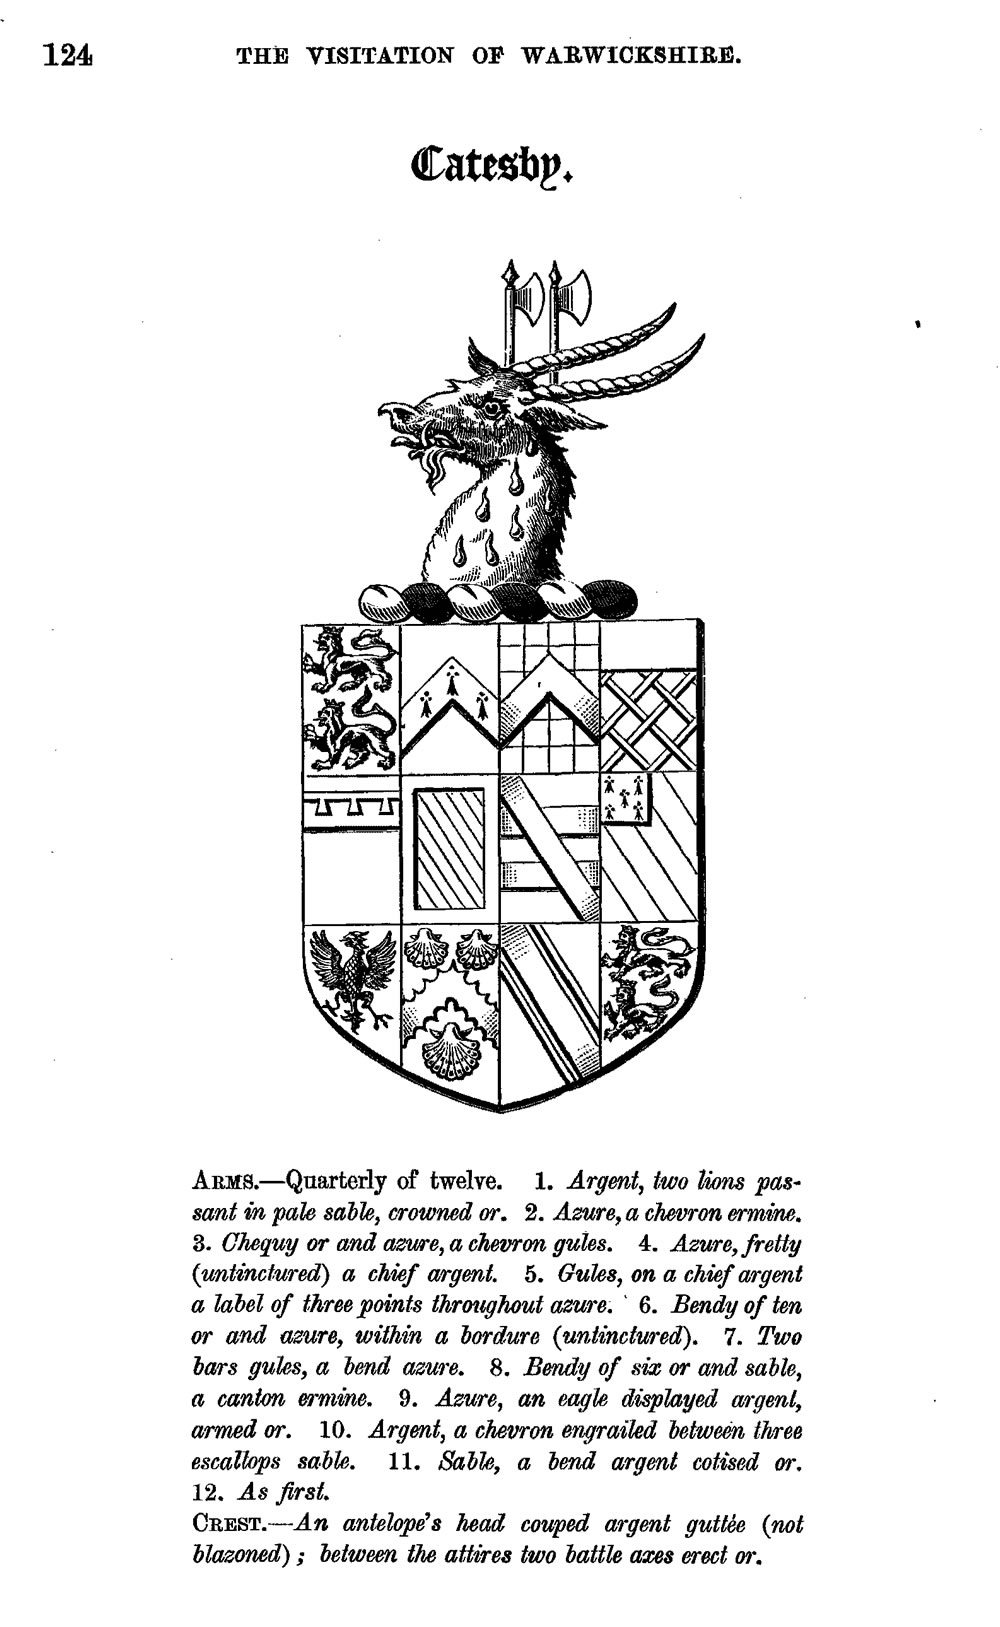 The Arms of the Catesby family in Warwickshire